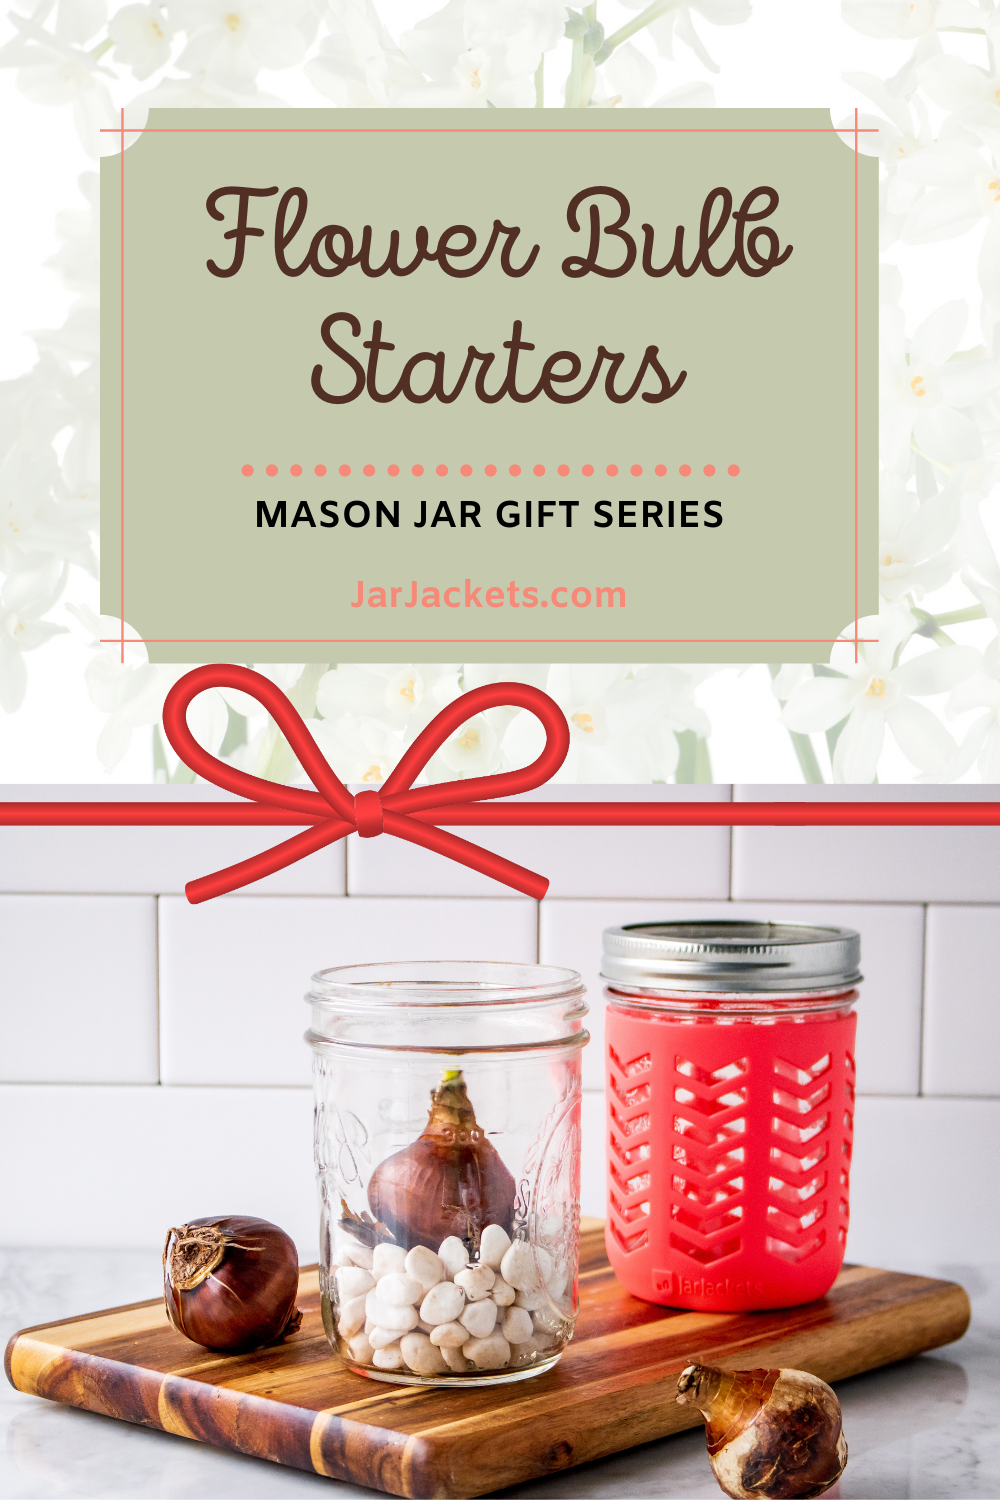 mason jar gift for coworkers- flower bulbs